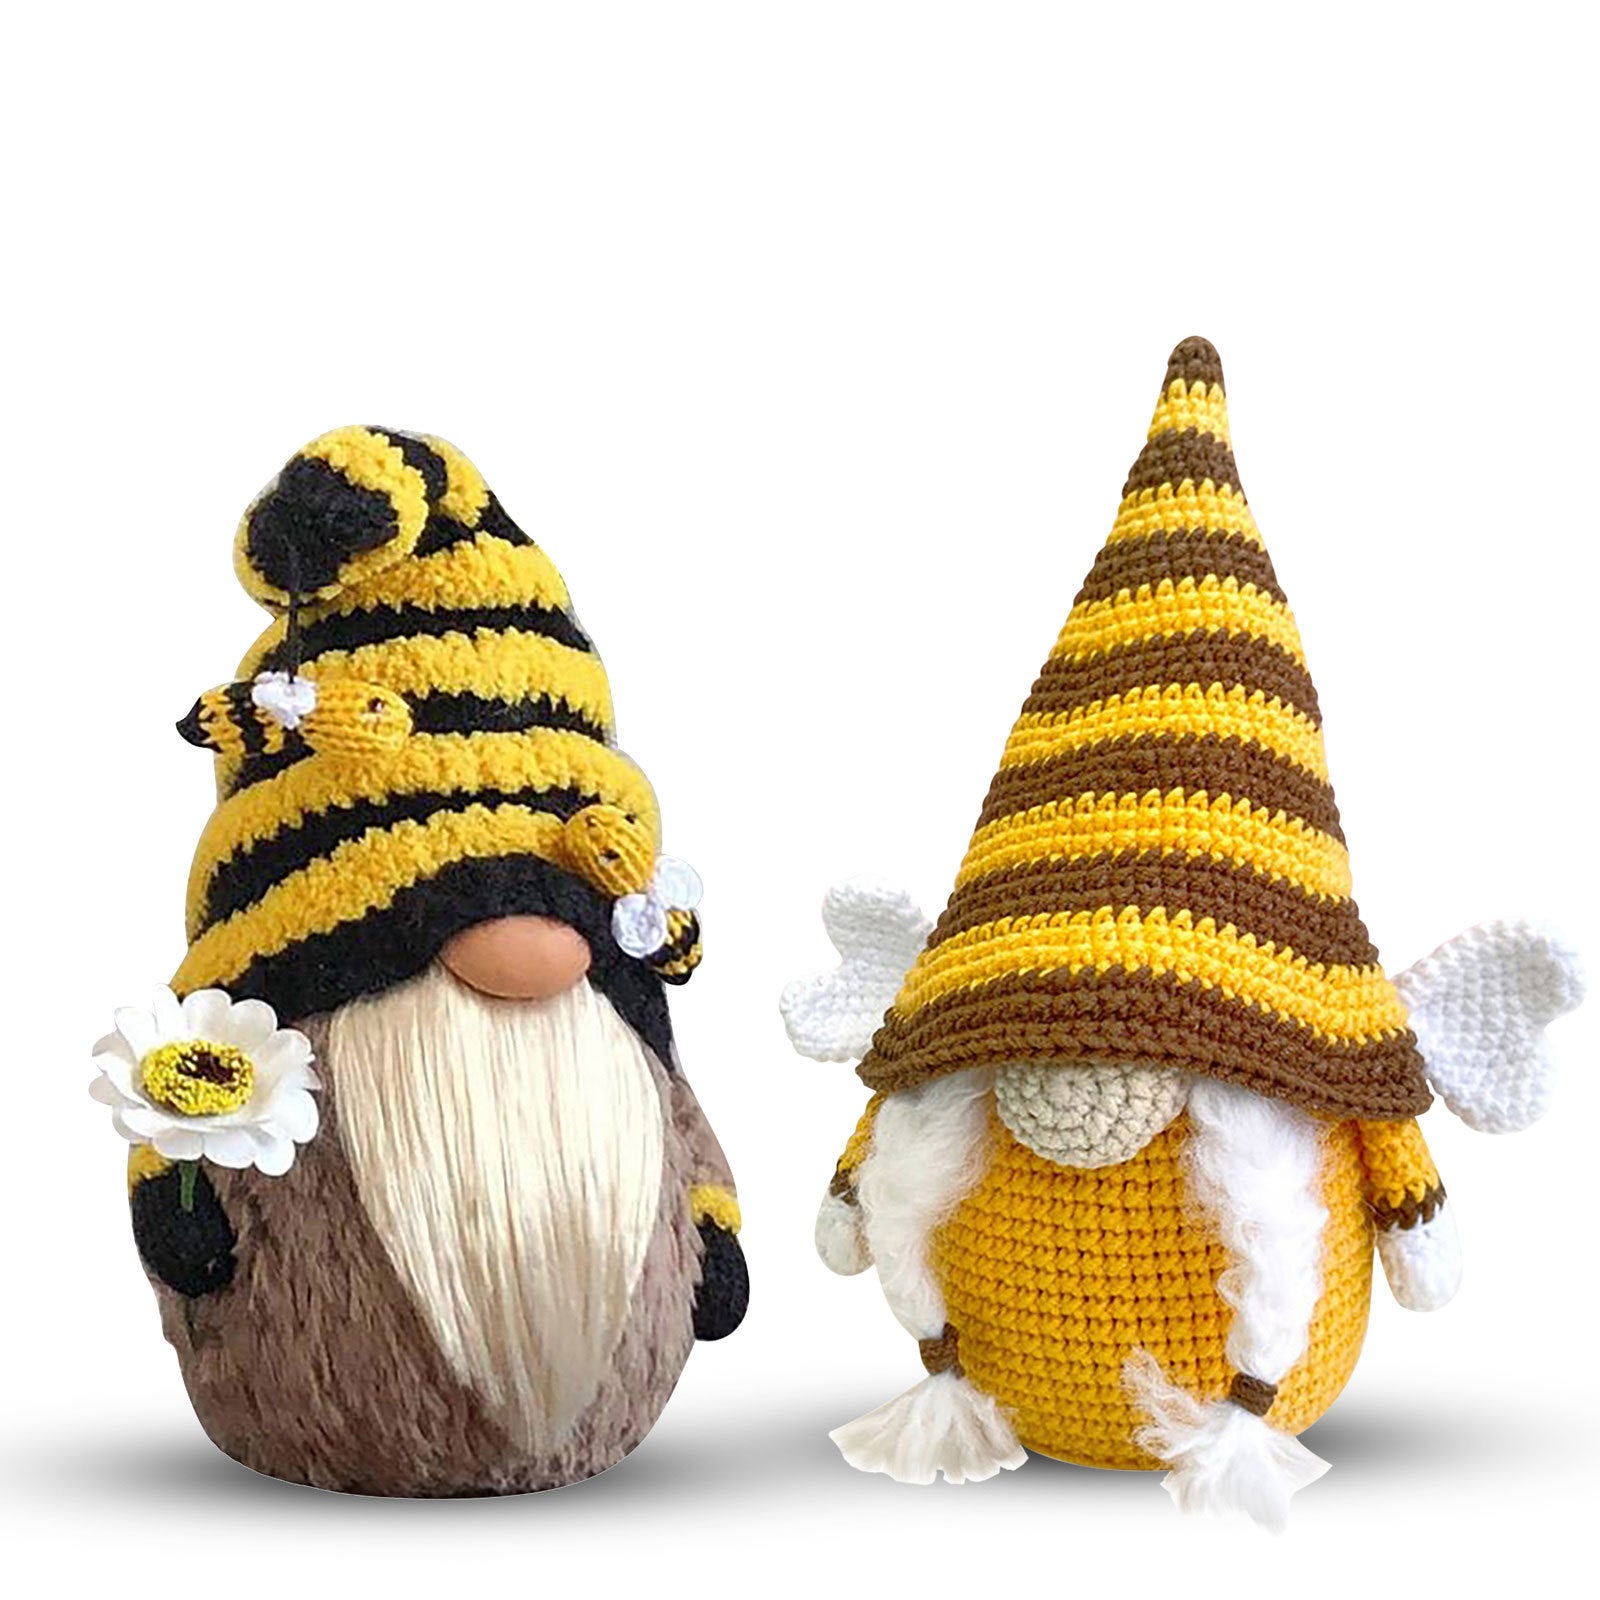 Knitted Plush Sunflower Faceless Doll Beard Old Man, Bee gnomes, Beekeeper gnomes, Honey gnomes, Bumblebee gnomes, Beehive gnomes, Pollen gnomes, Garden gnomes, Spring gnomes, Flower gnomes, Nature gnomes, Decorative gnomes, Rustic gnomes, Festive gnomes, Yellow and black gnomes, Bee-friendly gnomes, Happy bees gnomes,